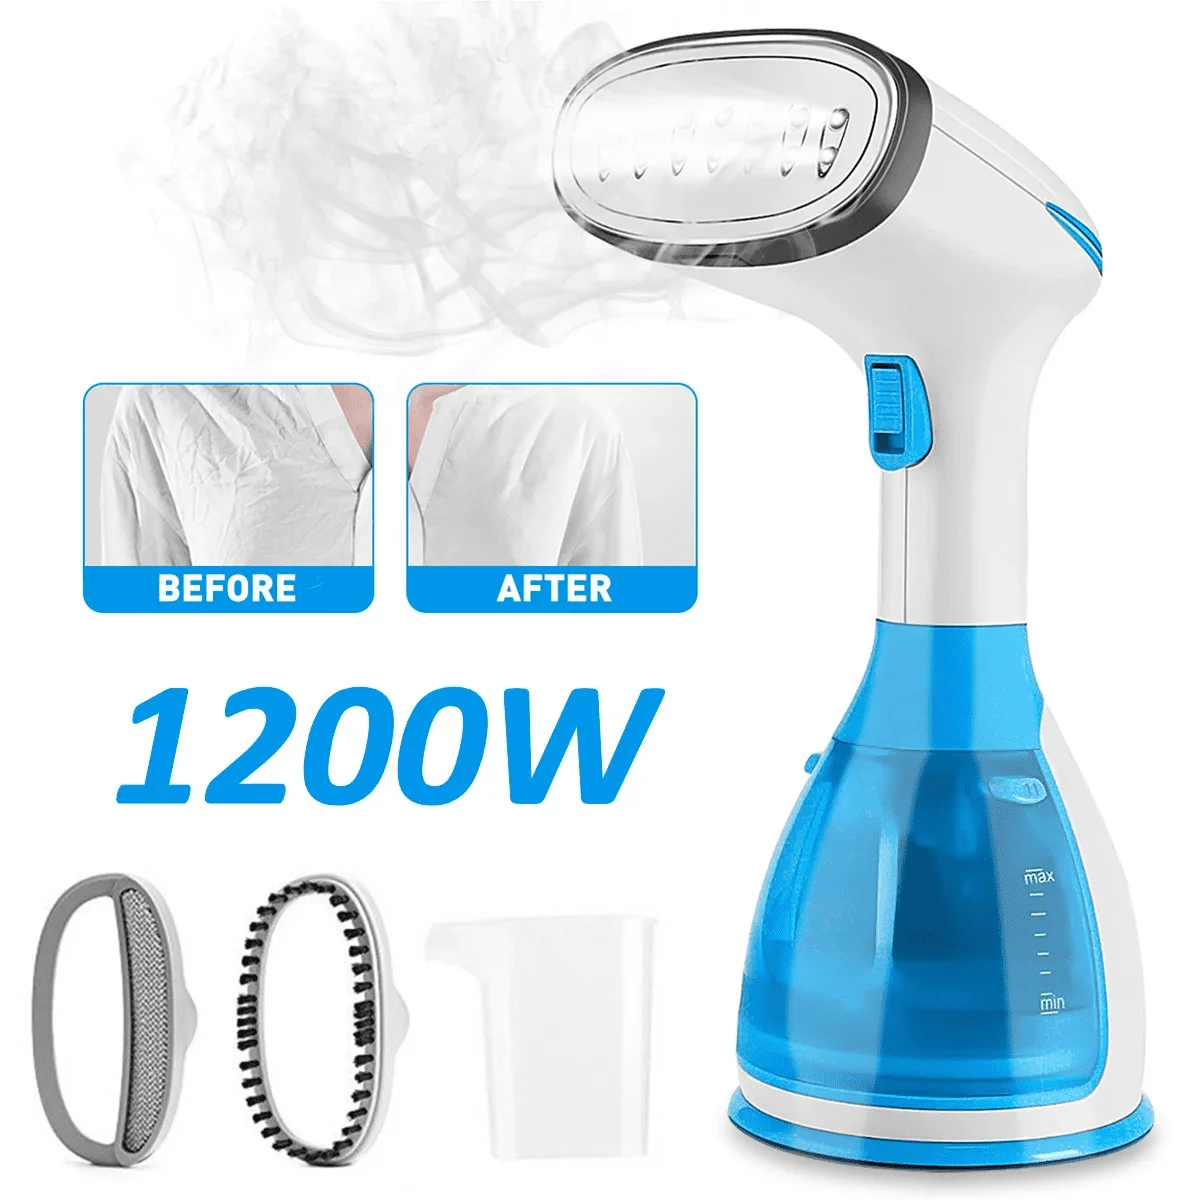 

Steamer for Clothes, 1200W 15s Heat up Handheld Garment Steamer,Dual-Use Clothes Fabric Wrinkles Steamer, Fabric Wrinkles Remove